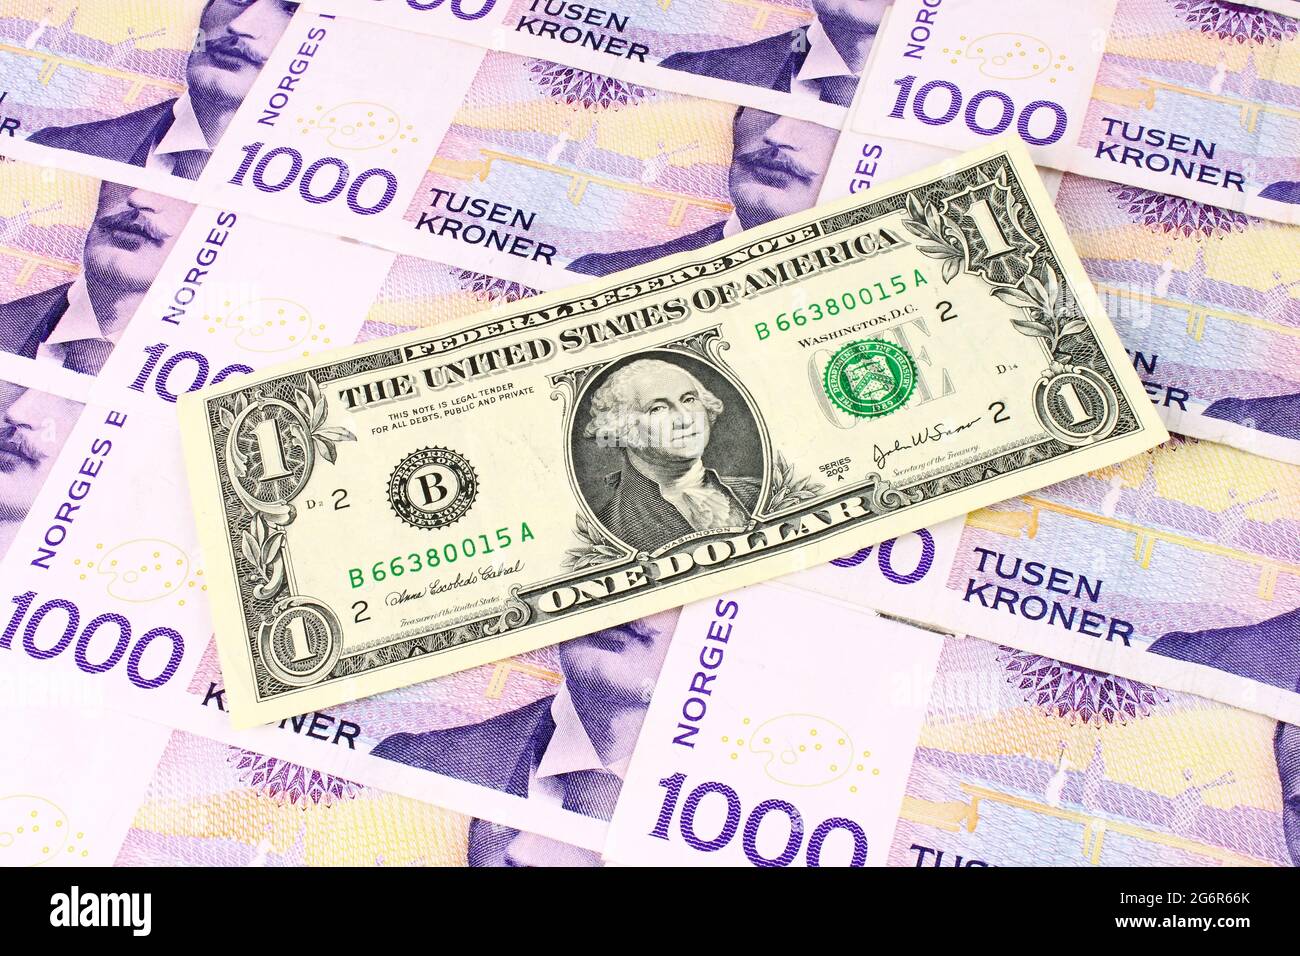 Norwegian currency notes in a grid pattern, with a one US Dollar note in the centre. Stock Photo